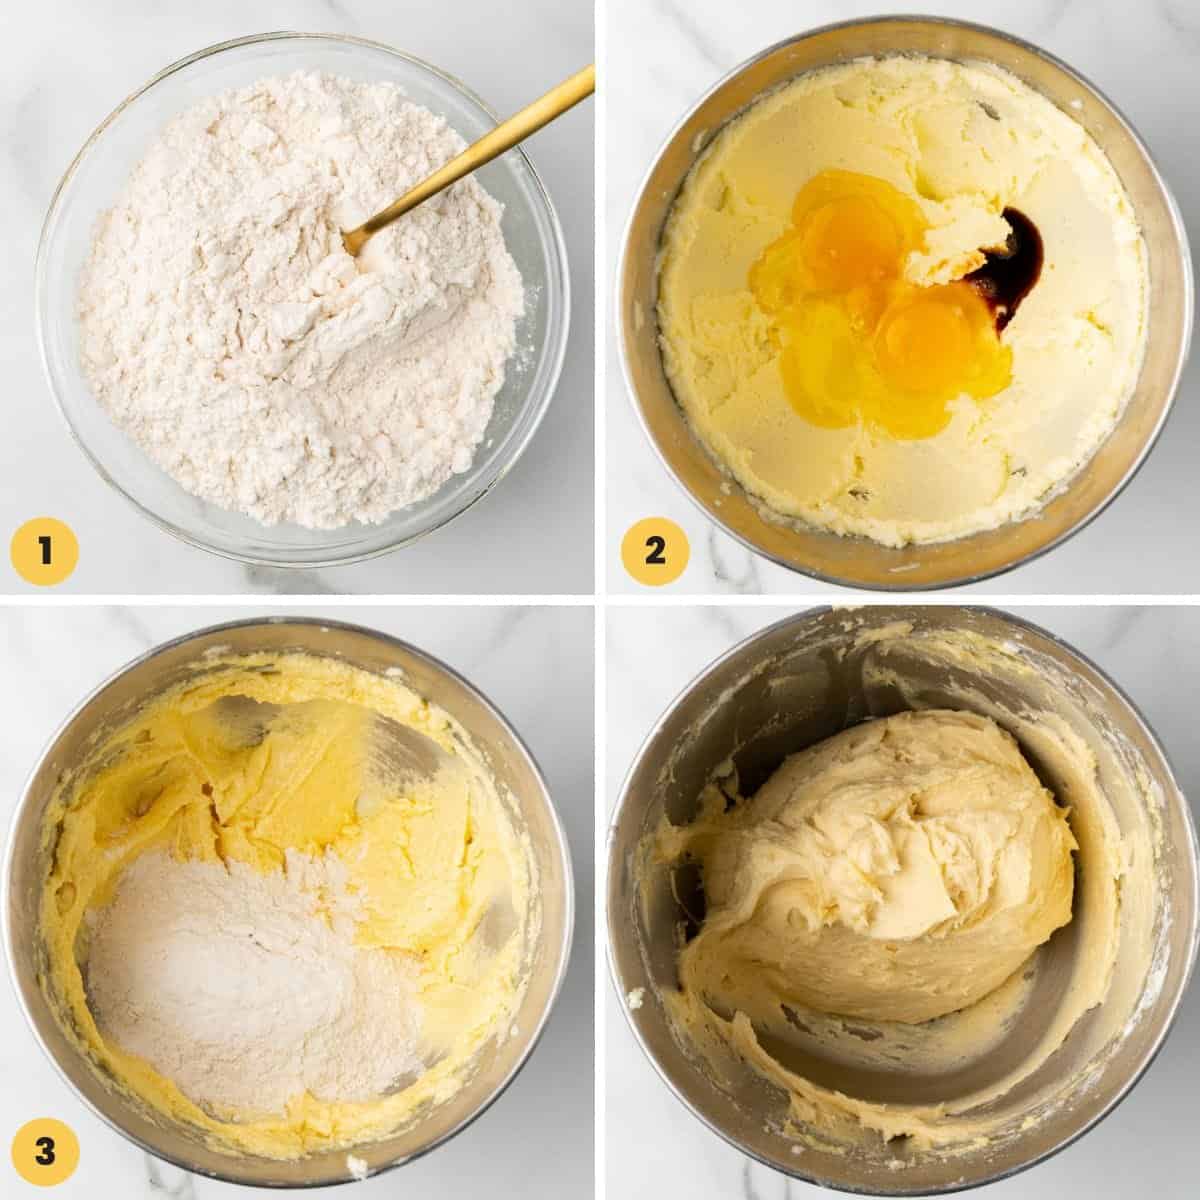 4 images showing how to make the dough for half moon cookies.